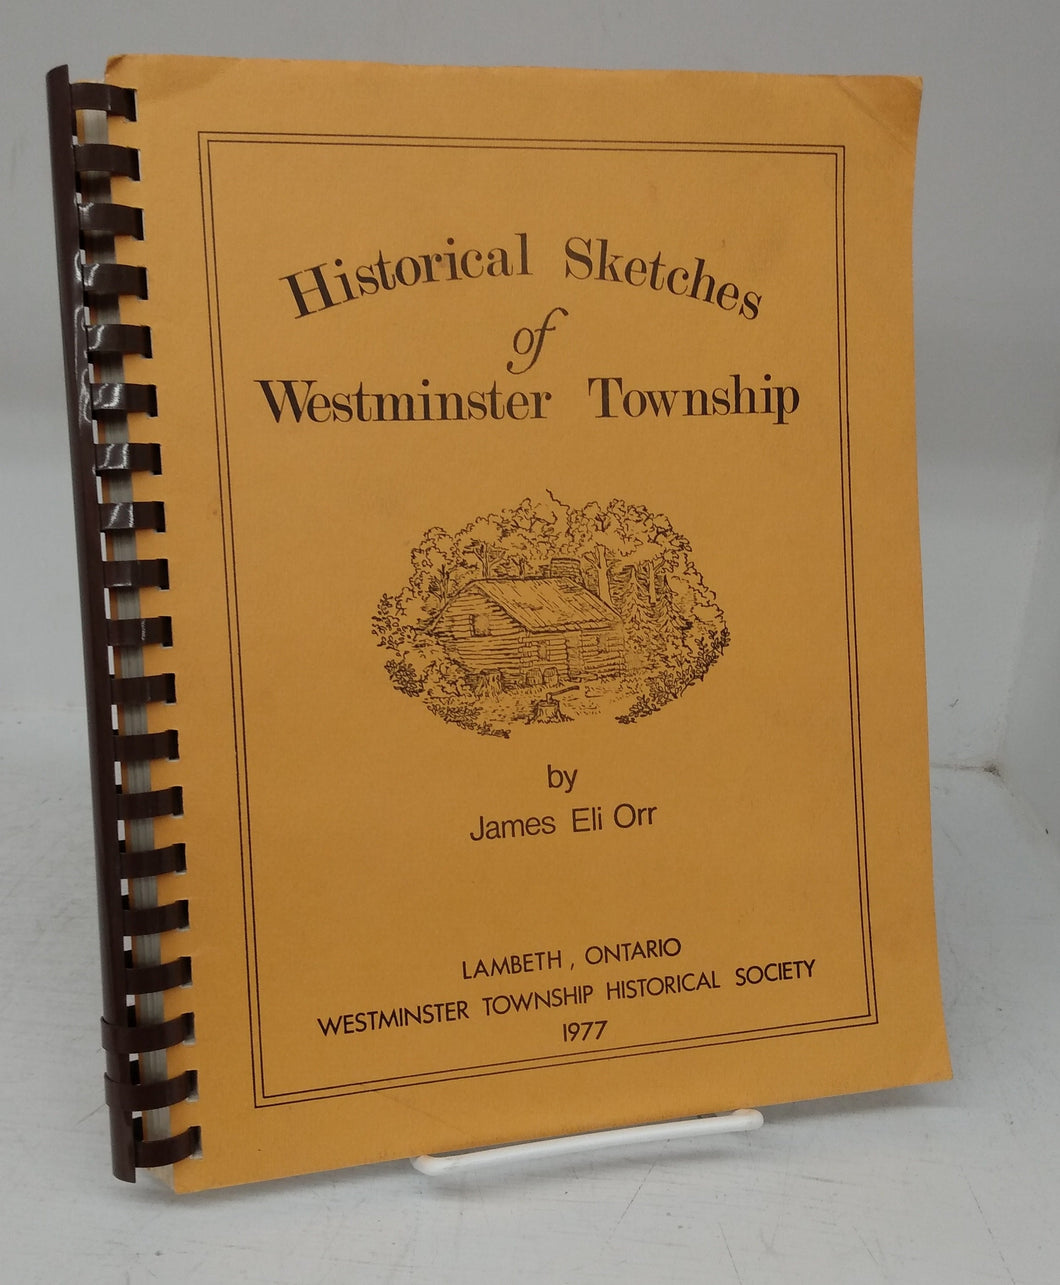 Historical Sketches of Westminster Township